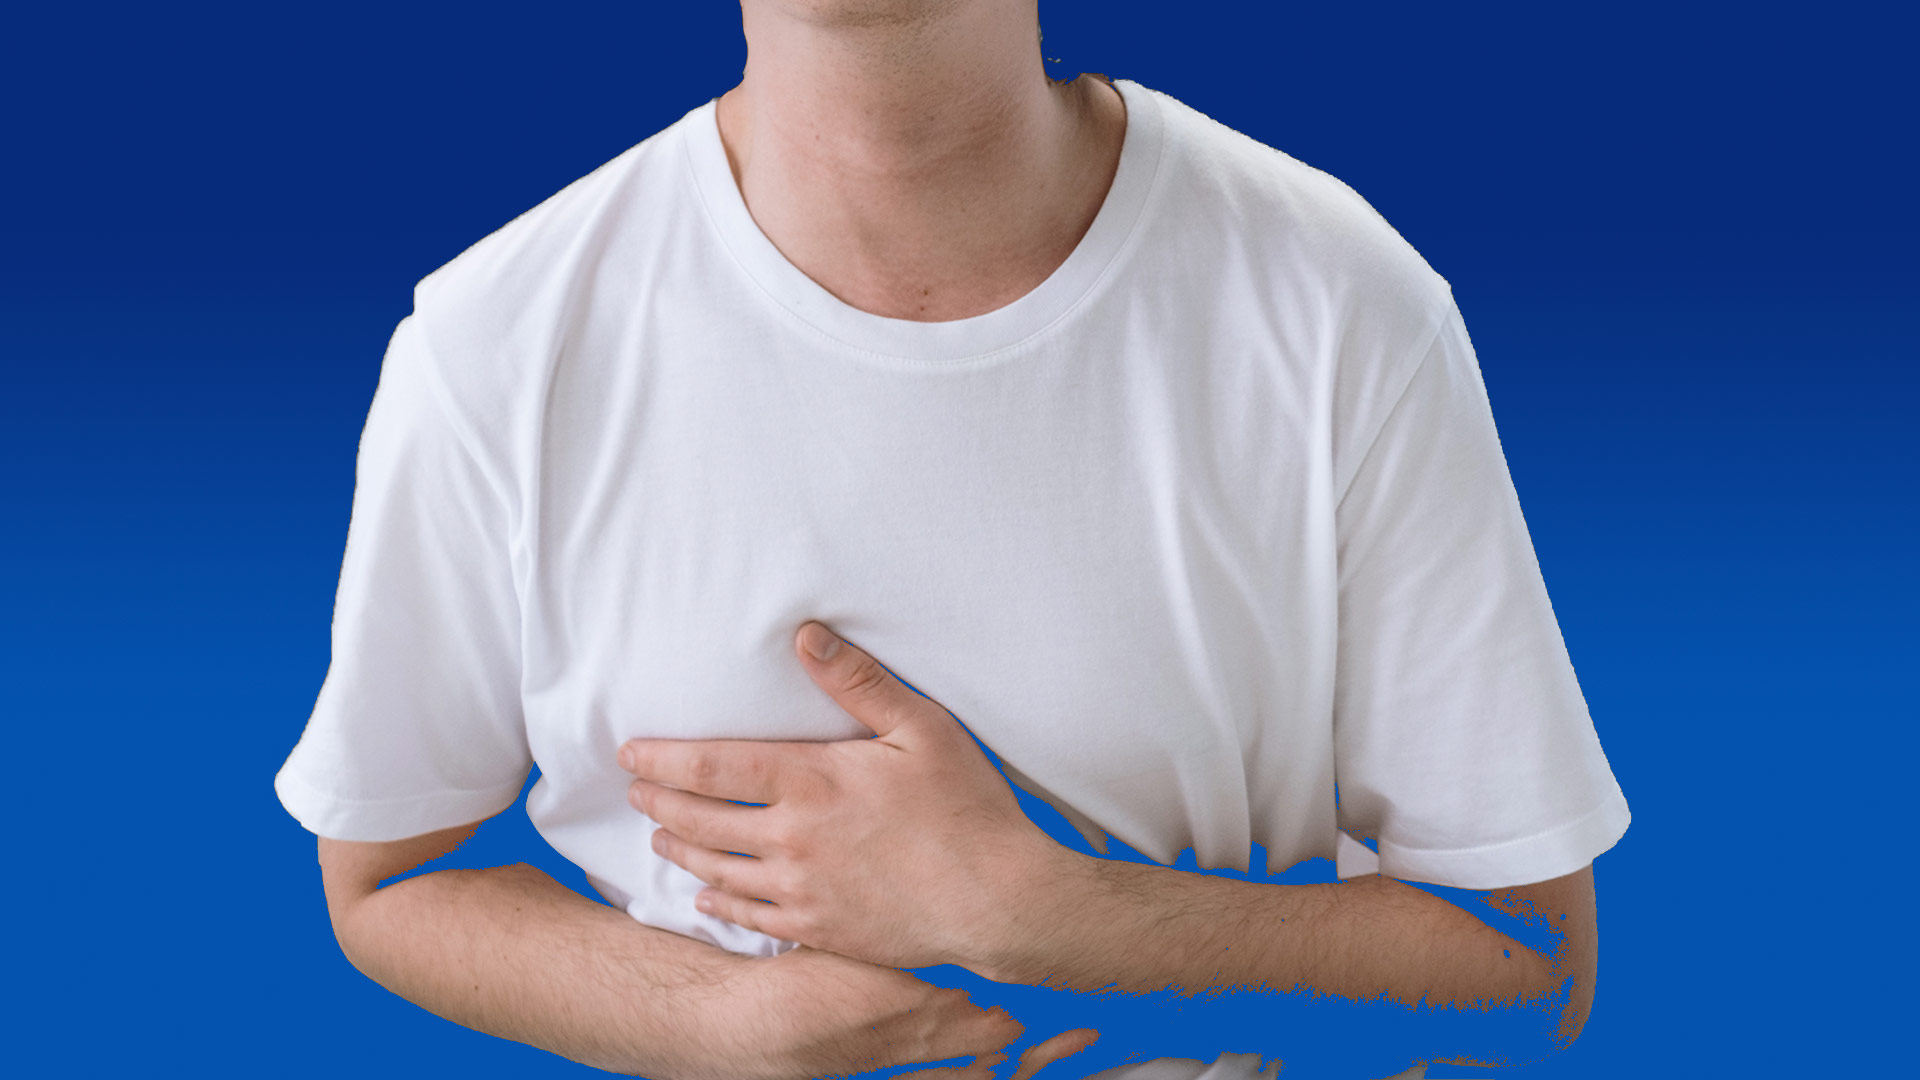 Stomach Pain - Causes, Symptoms, and Treatment